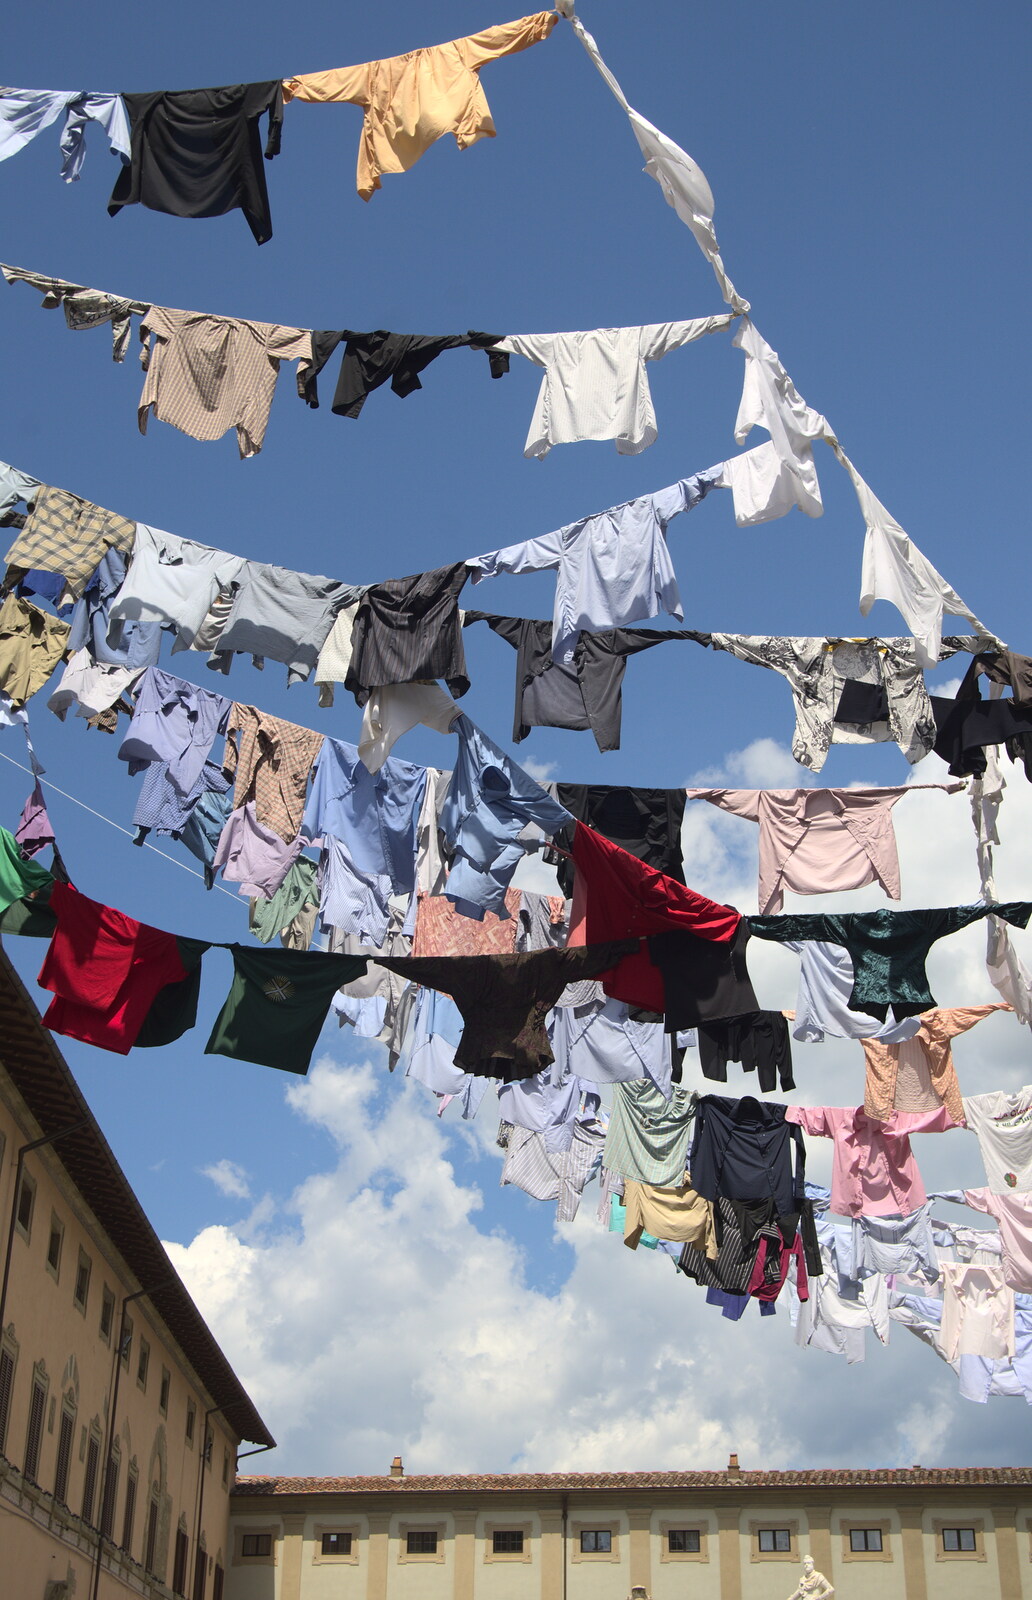 More laundry from Italian Weddings, Saracens and Swimming Pools, Arezzo, Tuscany - 12th June 2013